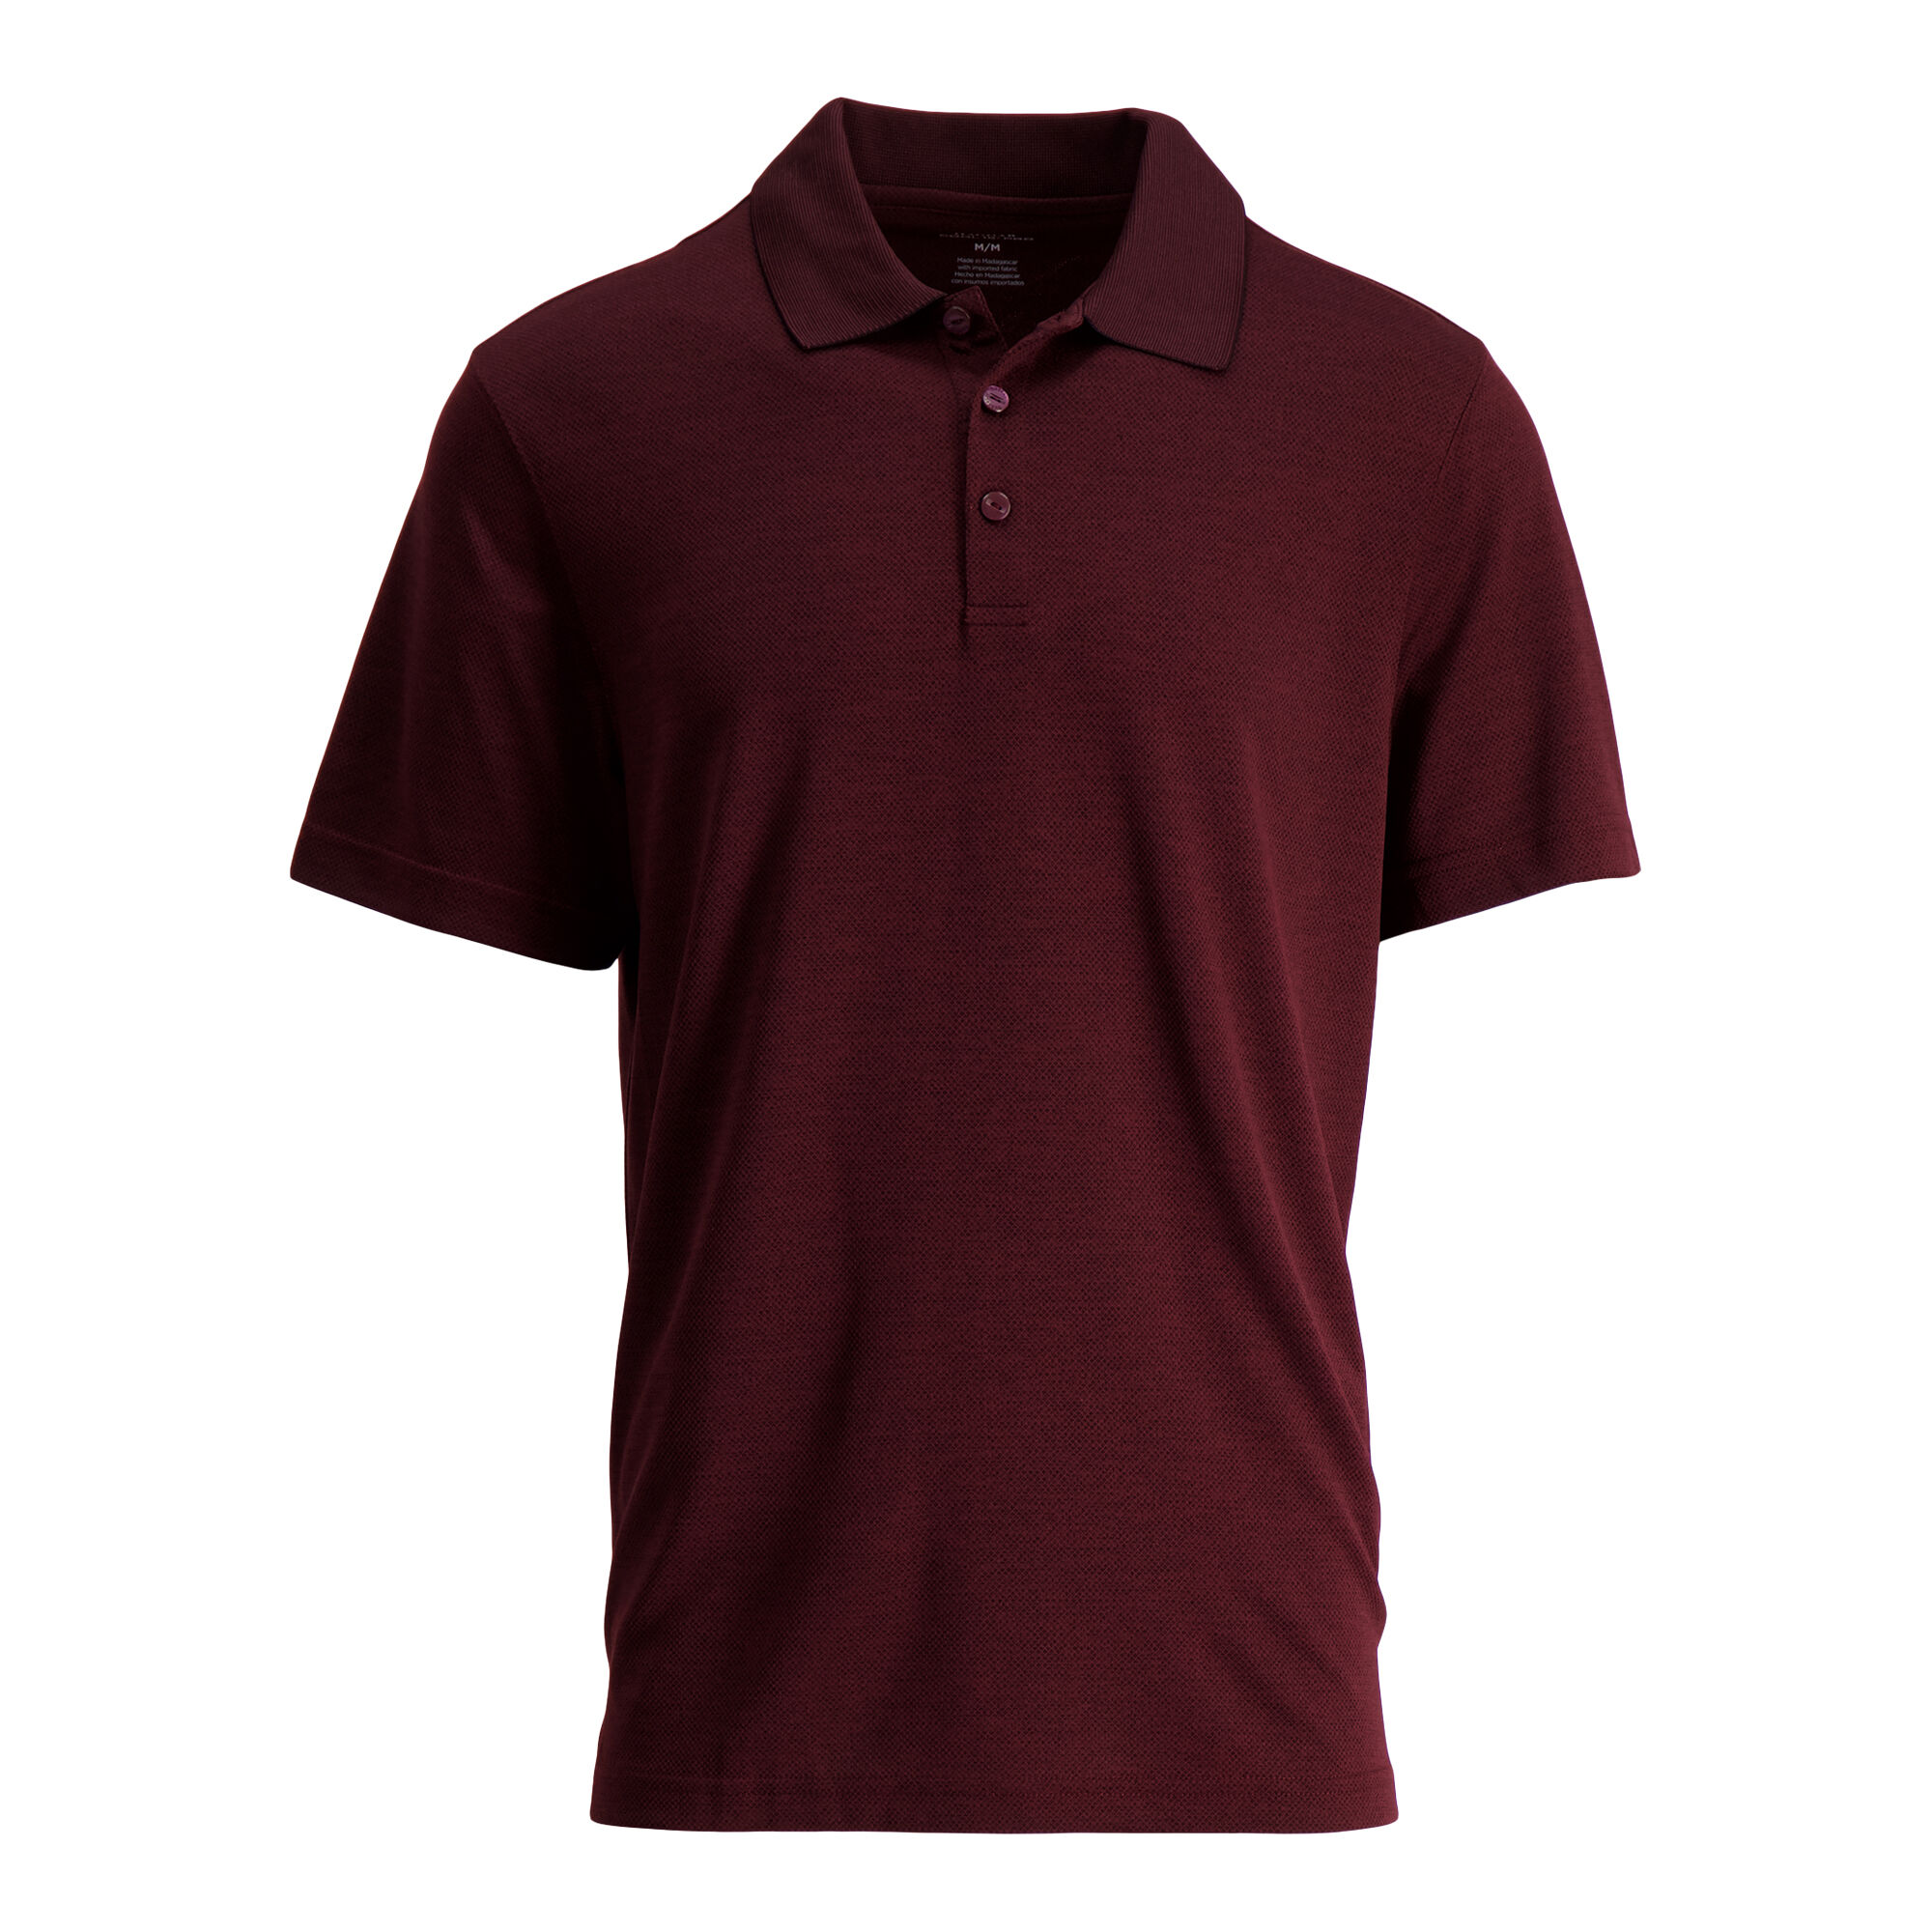 Haggar Cool 18 Pro Textured Golf Polo Windsor Wine (028462 Clothing Shirts & Tops) photo